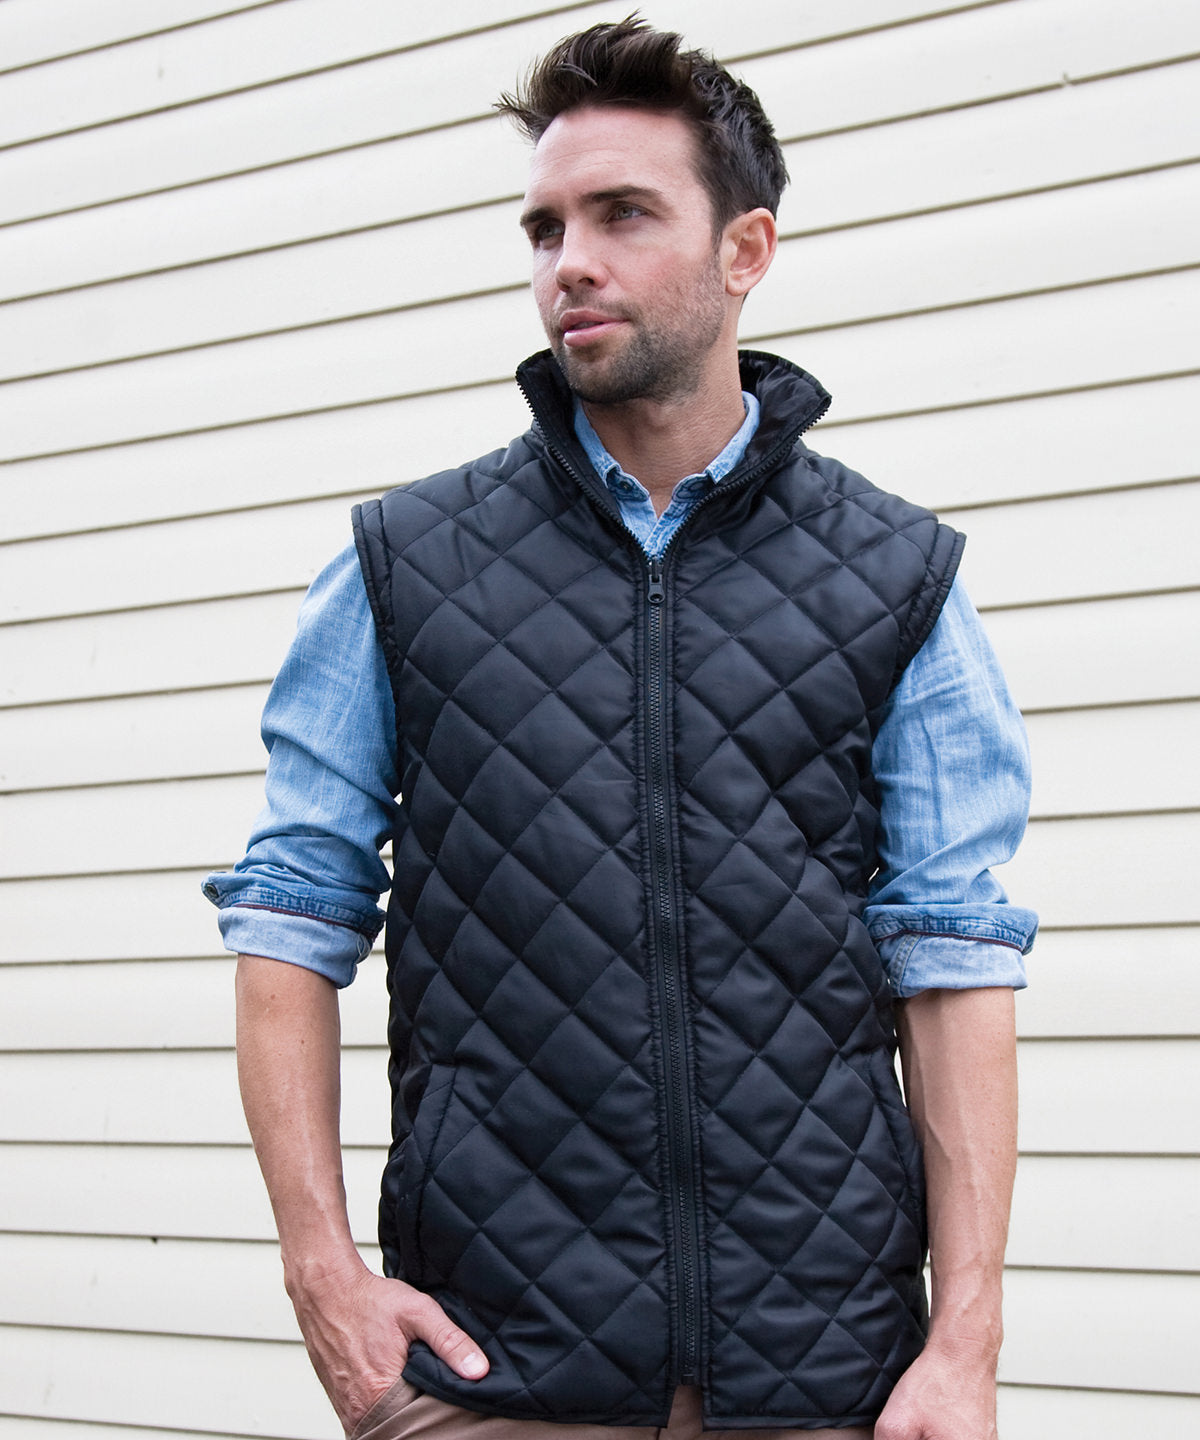 Core 3-in-1 jacket with quilted bodywarmer